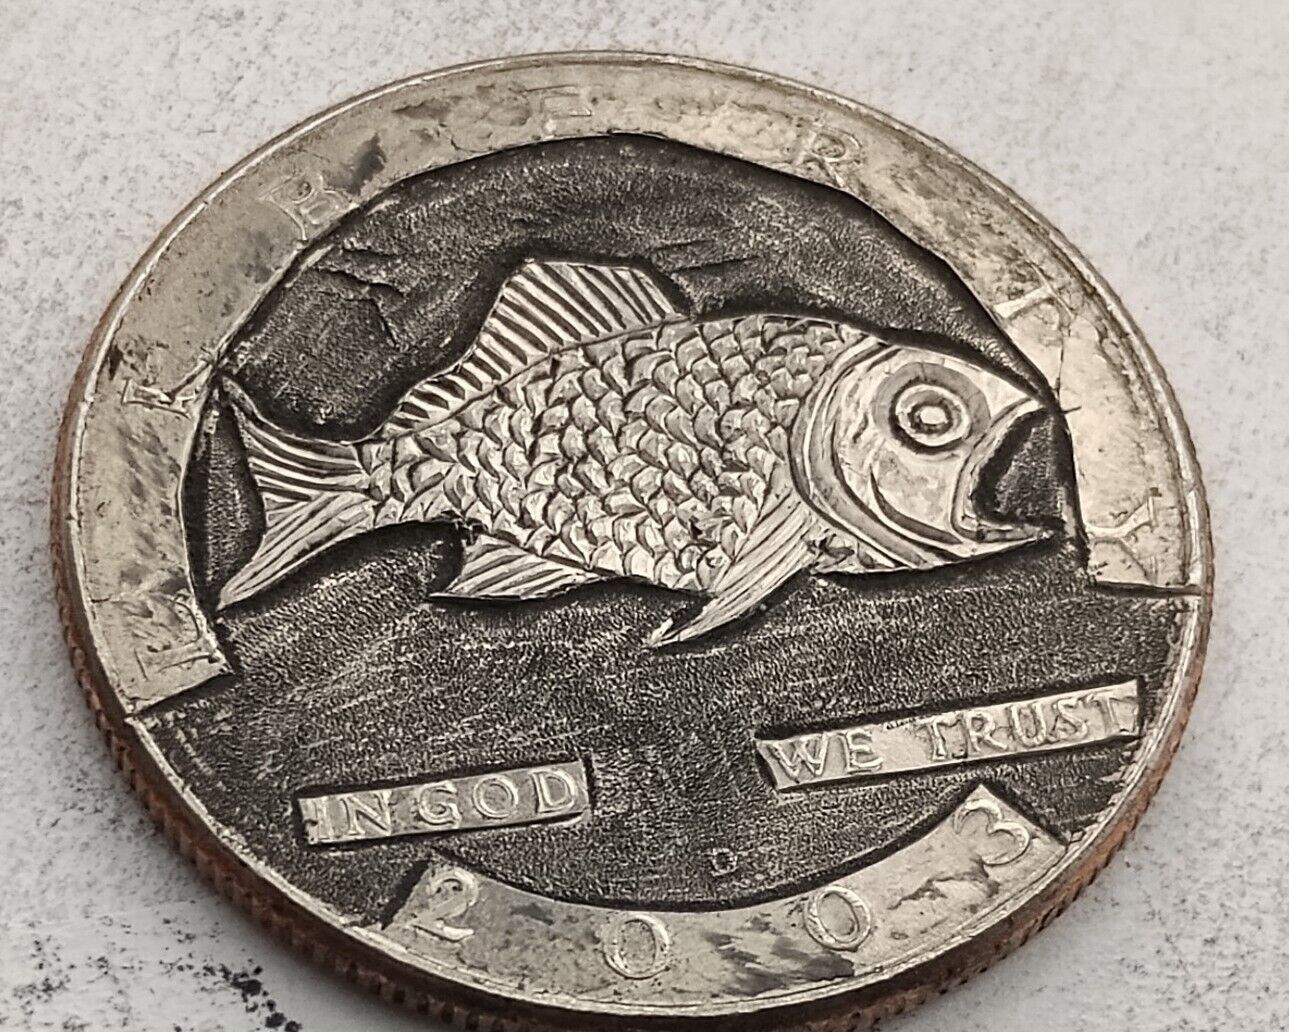 The Fish Hand Carved Into A Half Dollar Hobo Nickel